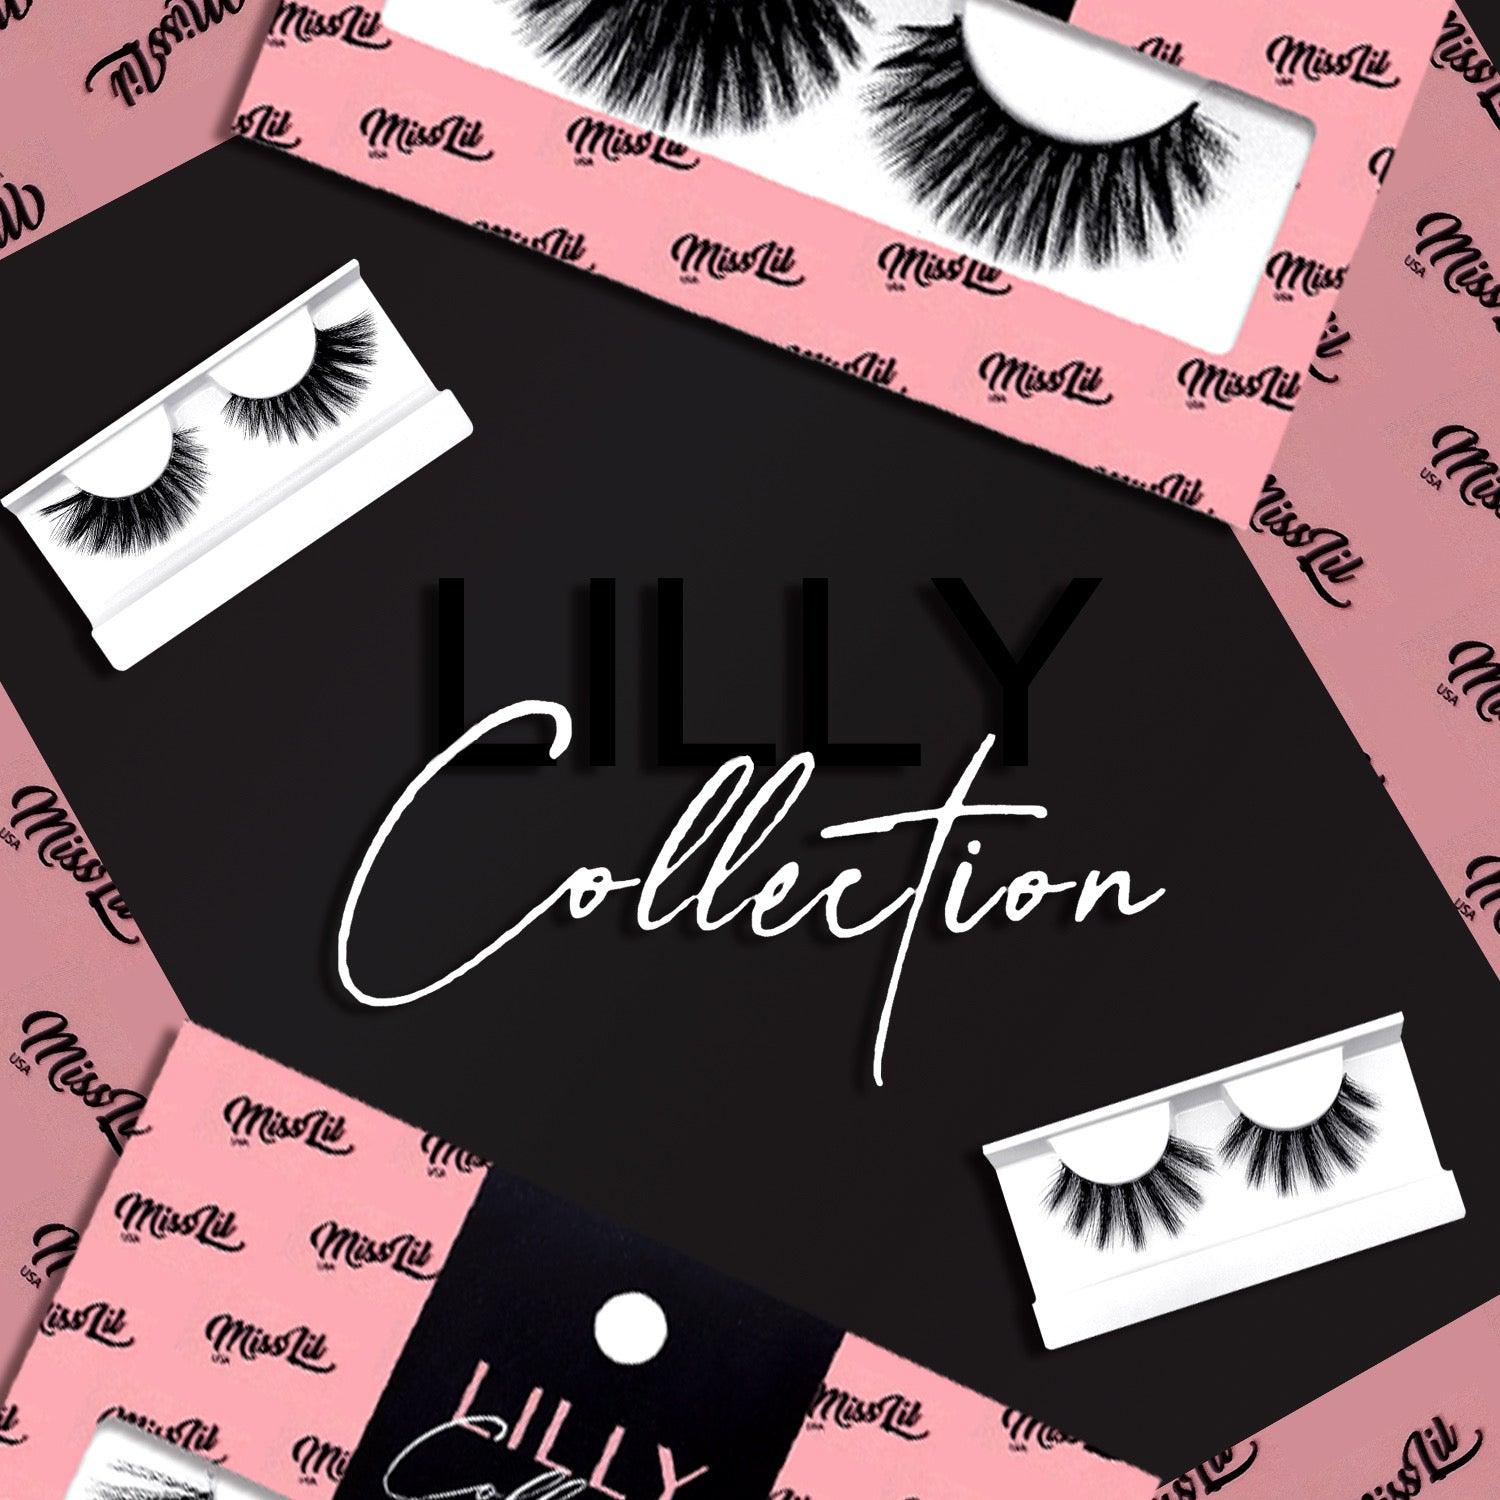 Lilly Collection Eyelashes (144 pcs)(12 stills) - Miss Lil USA